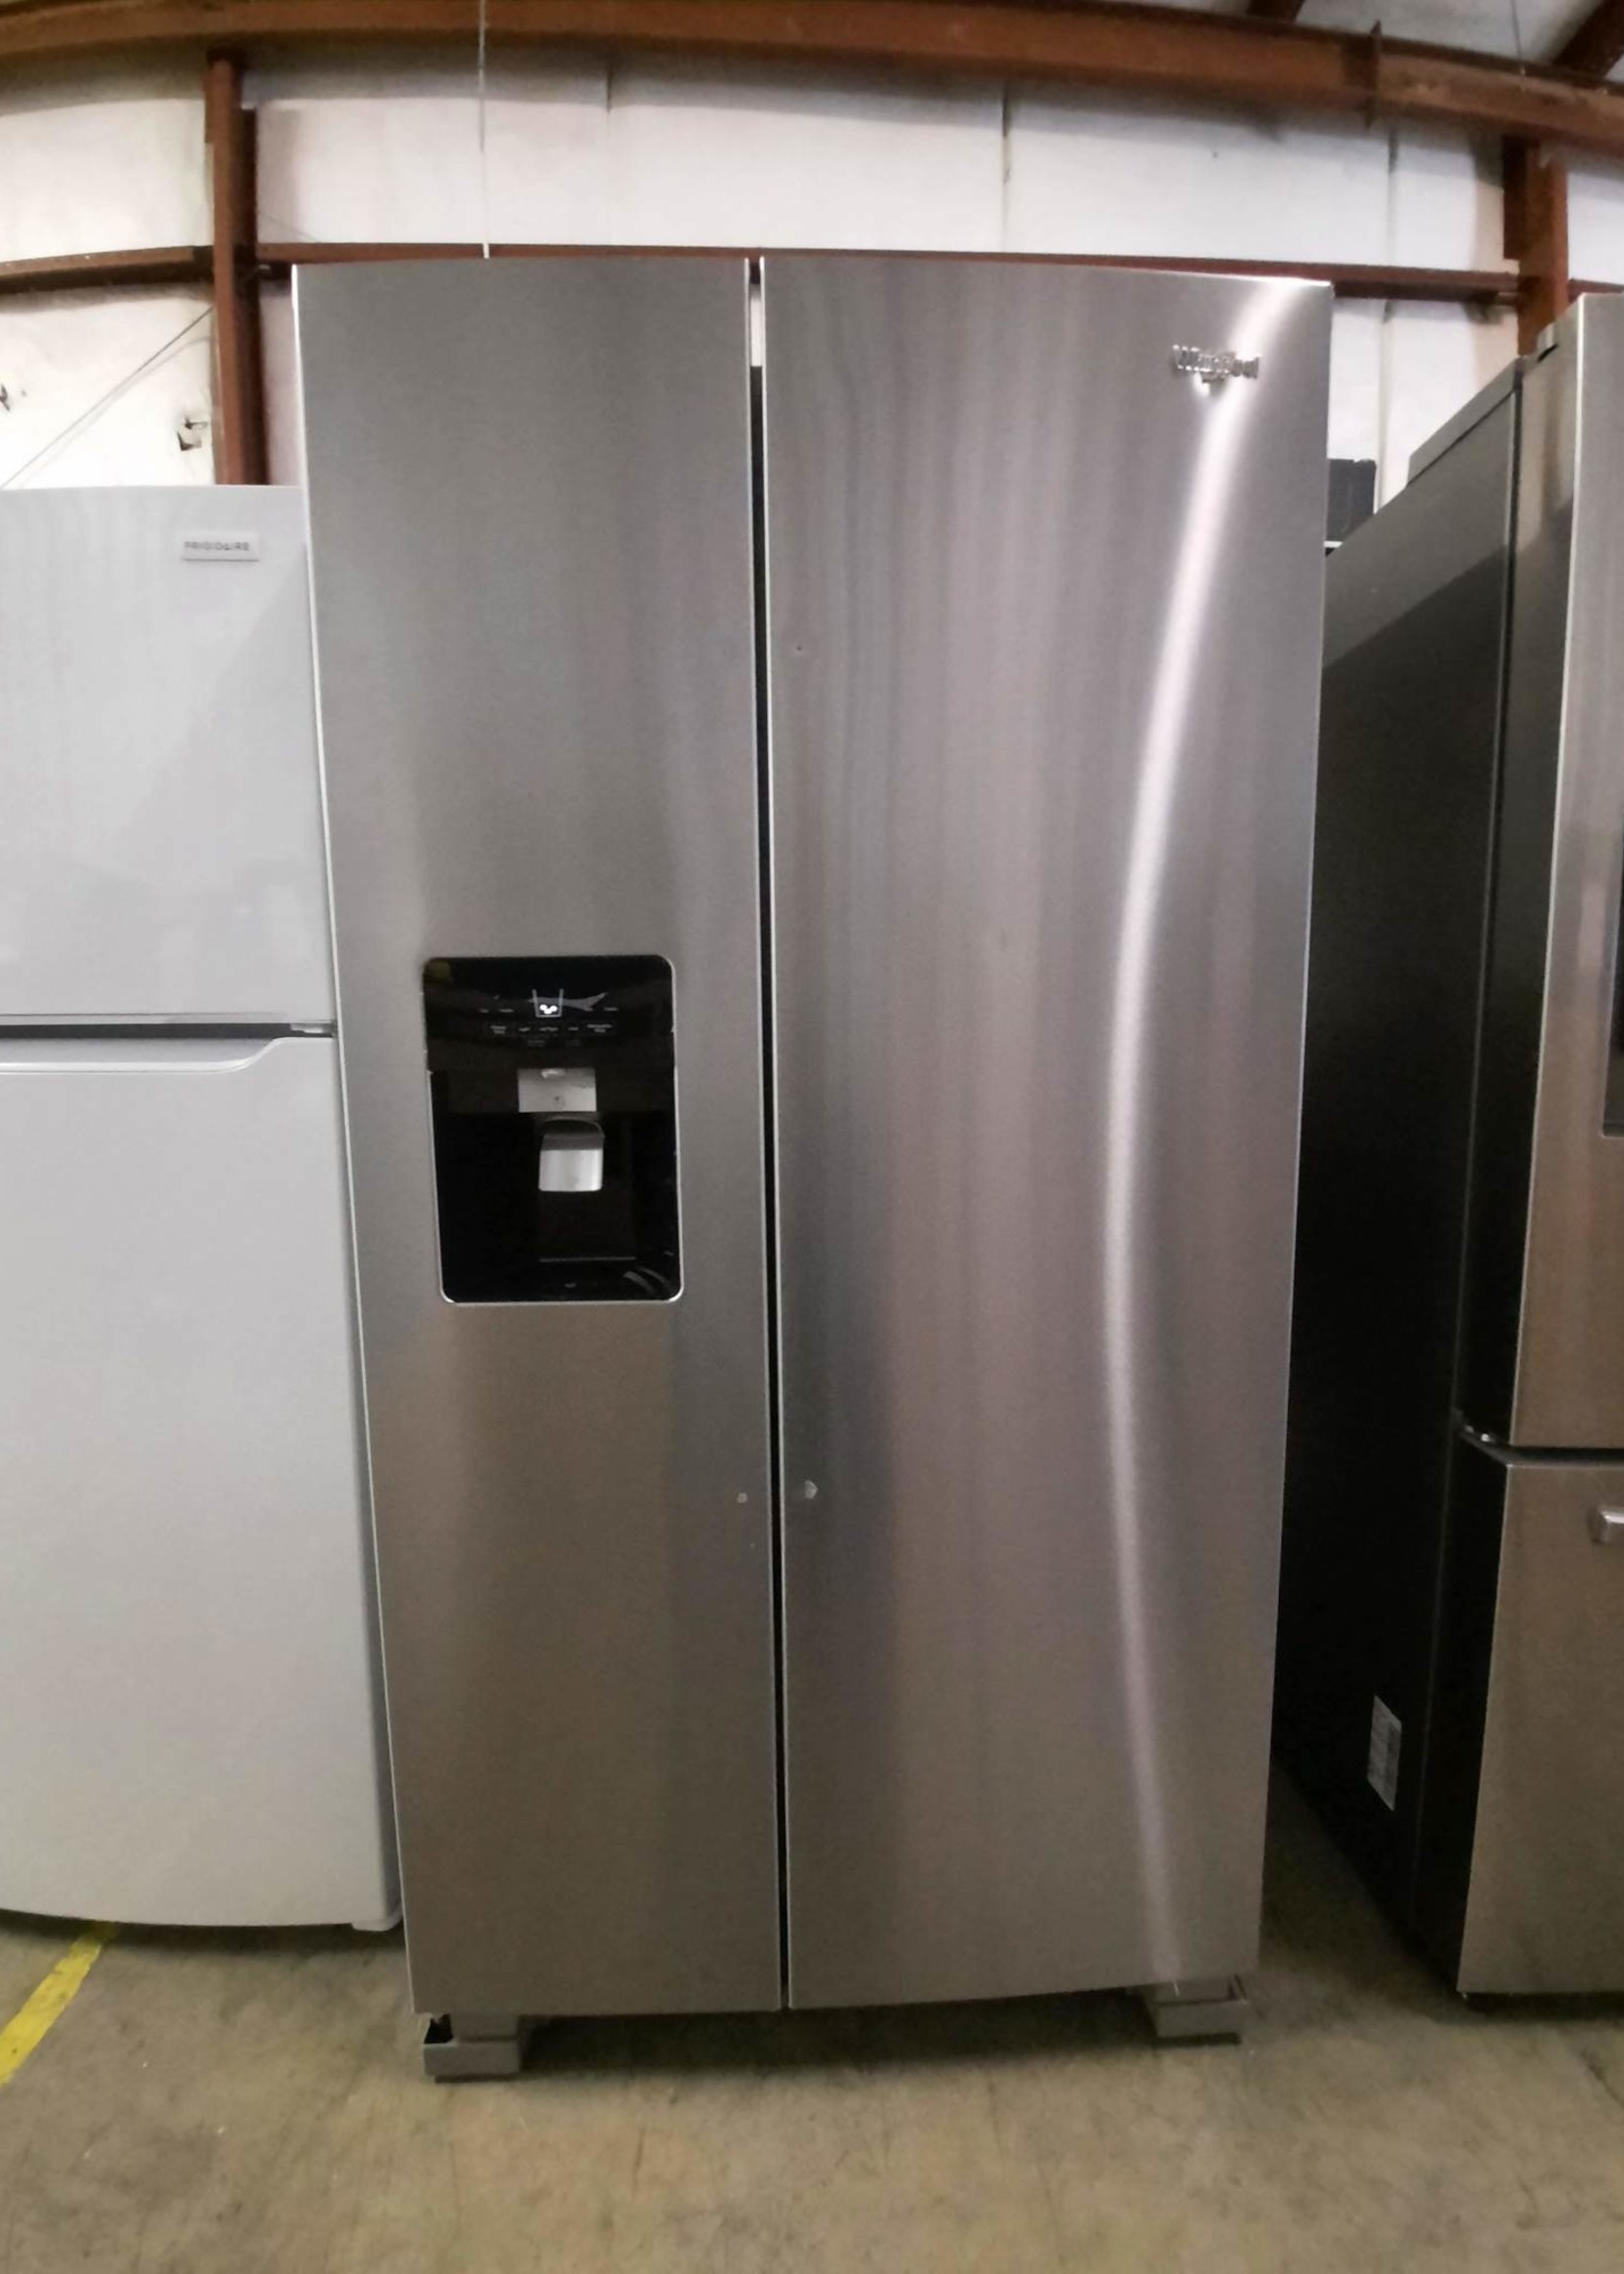 Whirlpool *Whirlpool WRS555SIHZ  24.5-cu ft Side-by-Side Refrigerator with Ice Maker (Fingerprint Resistant Stainless Steel)